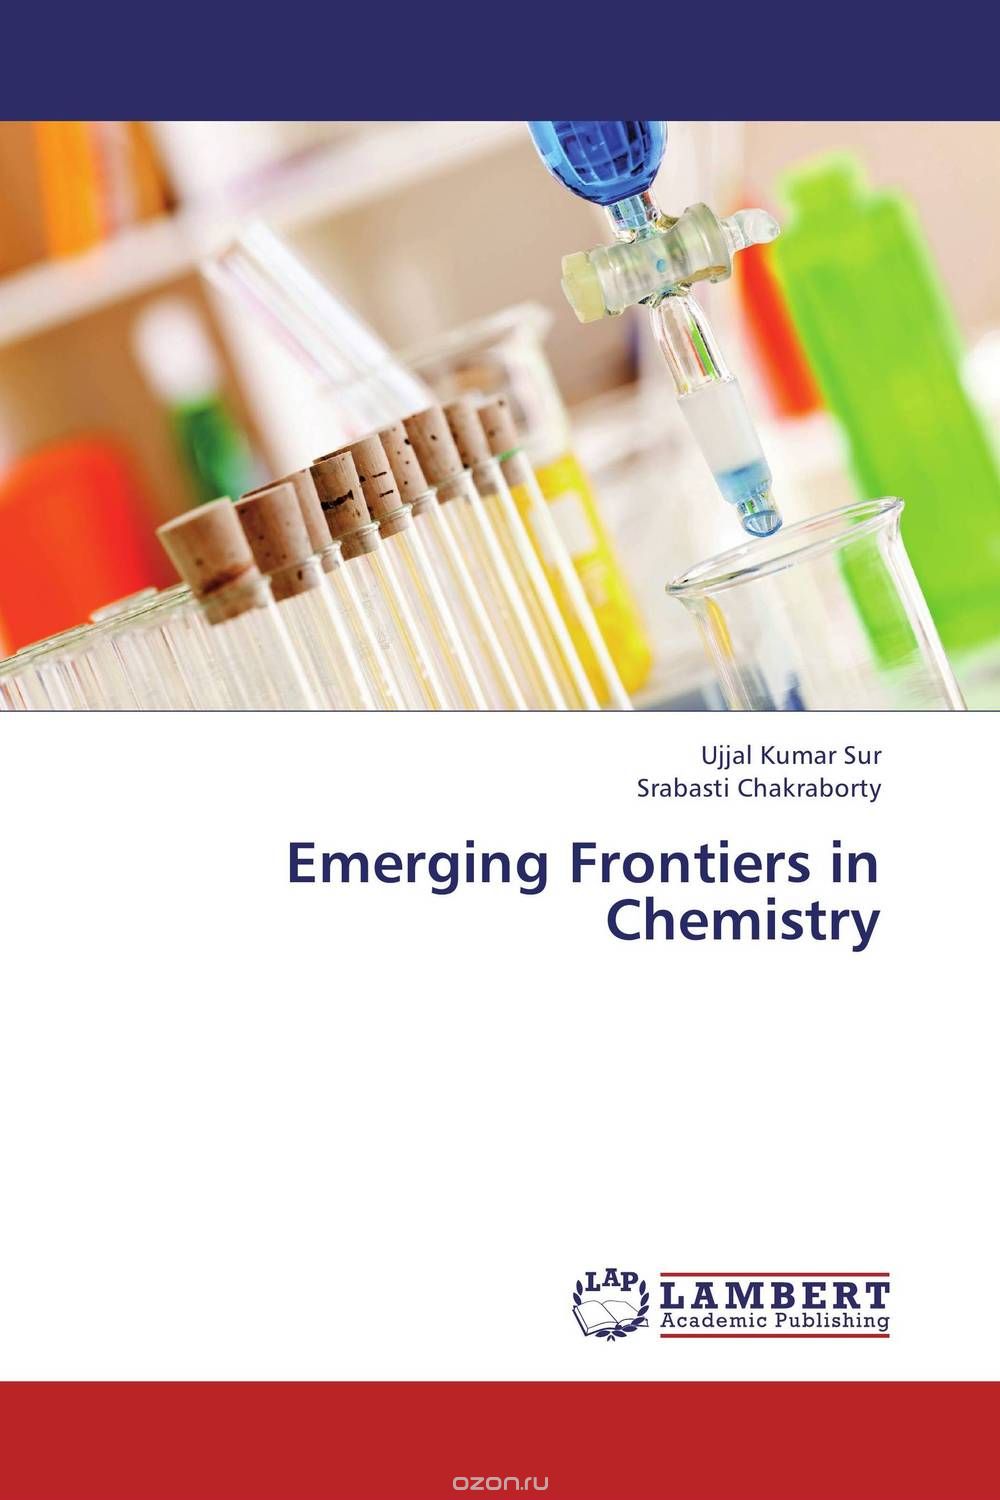 Emerging Frontiers in Chemistry